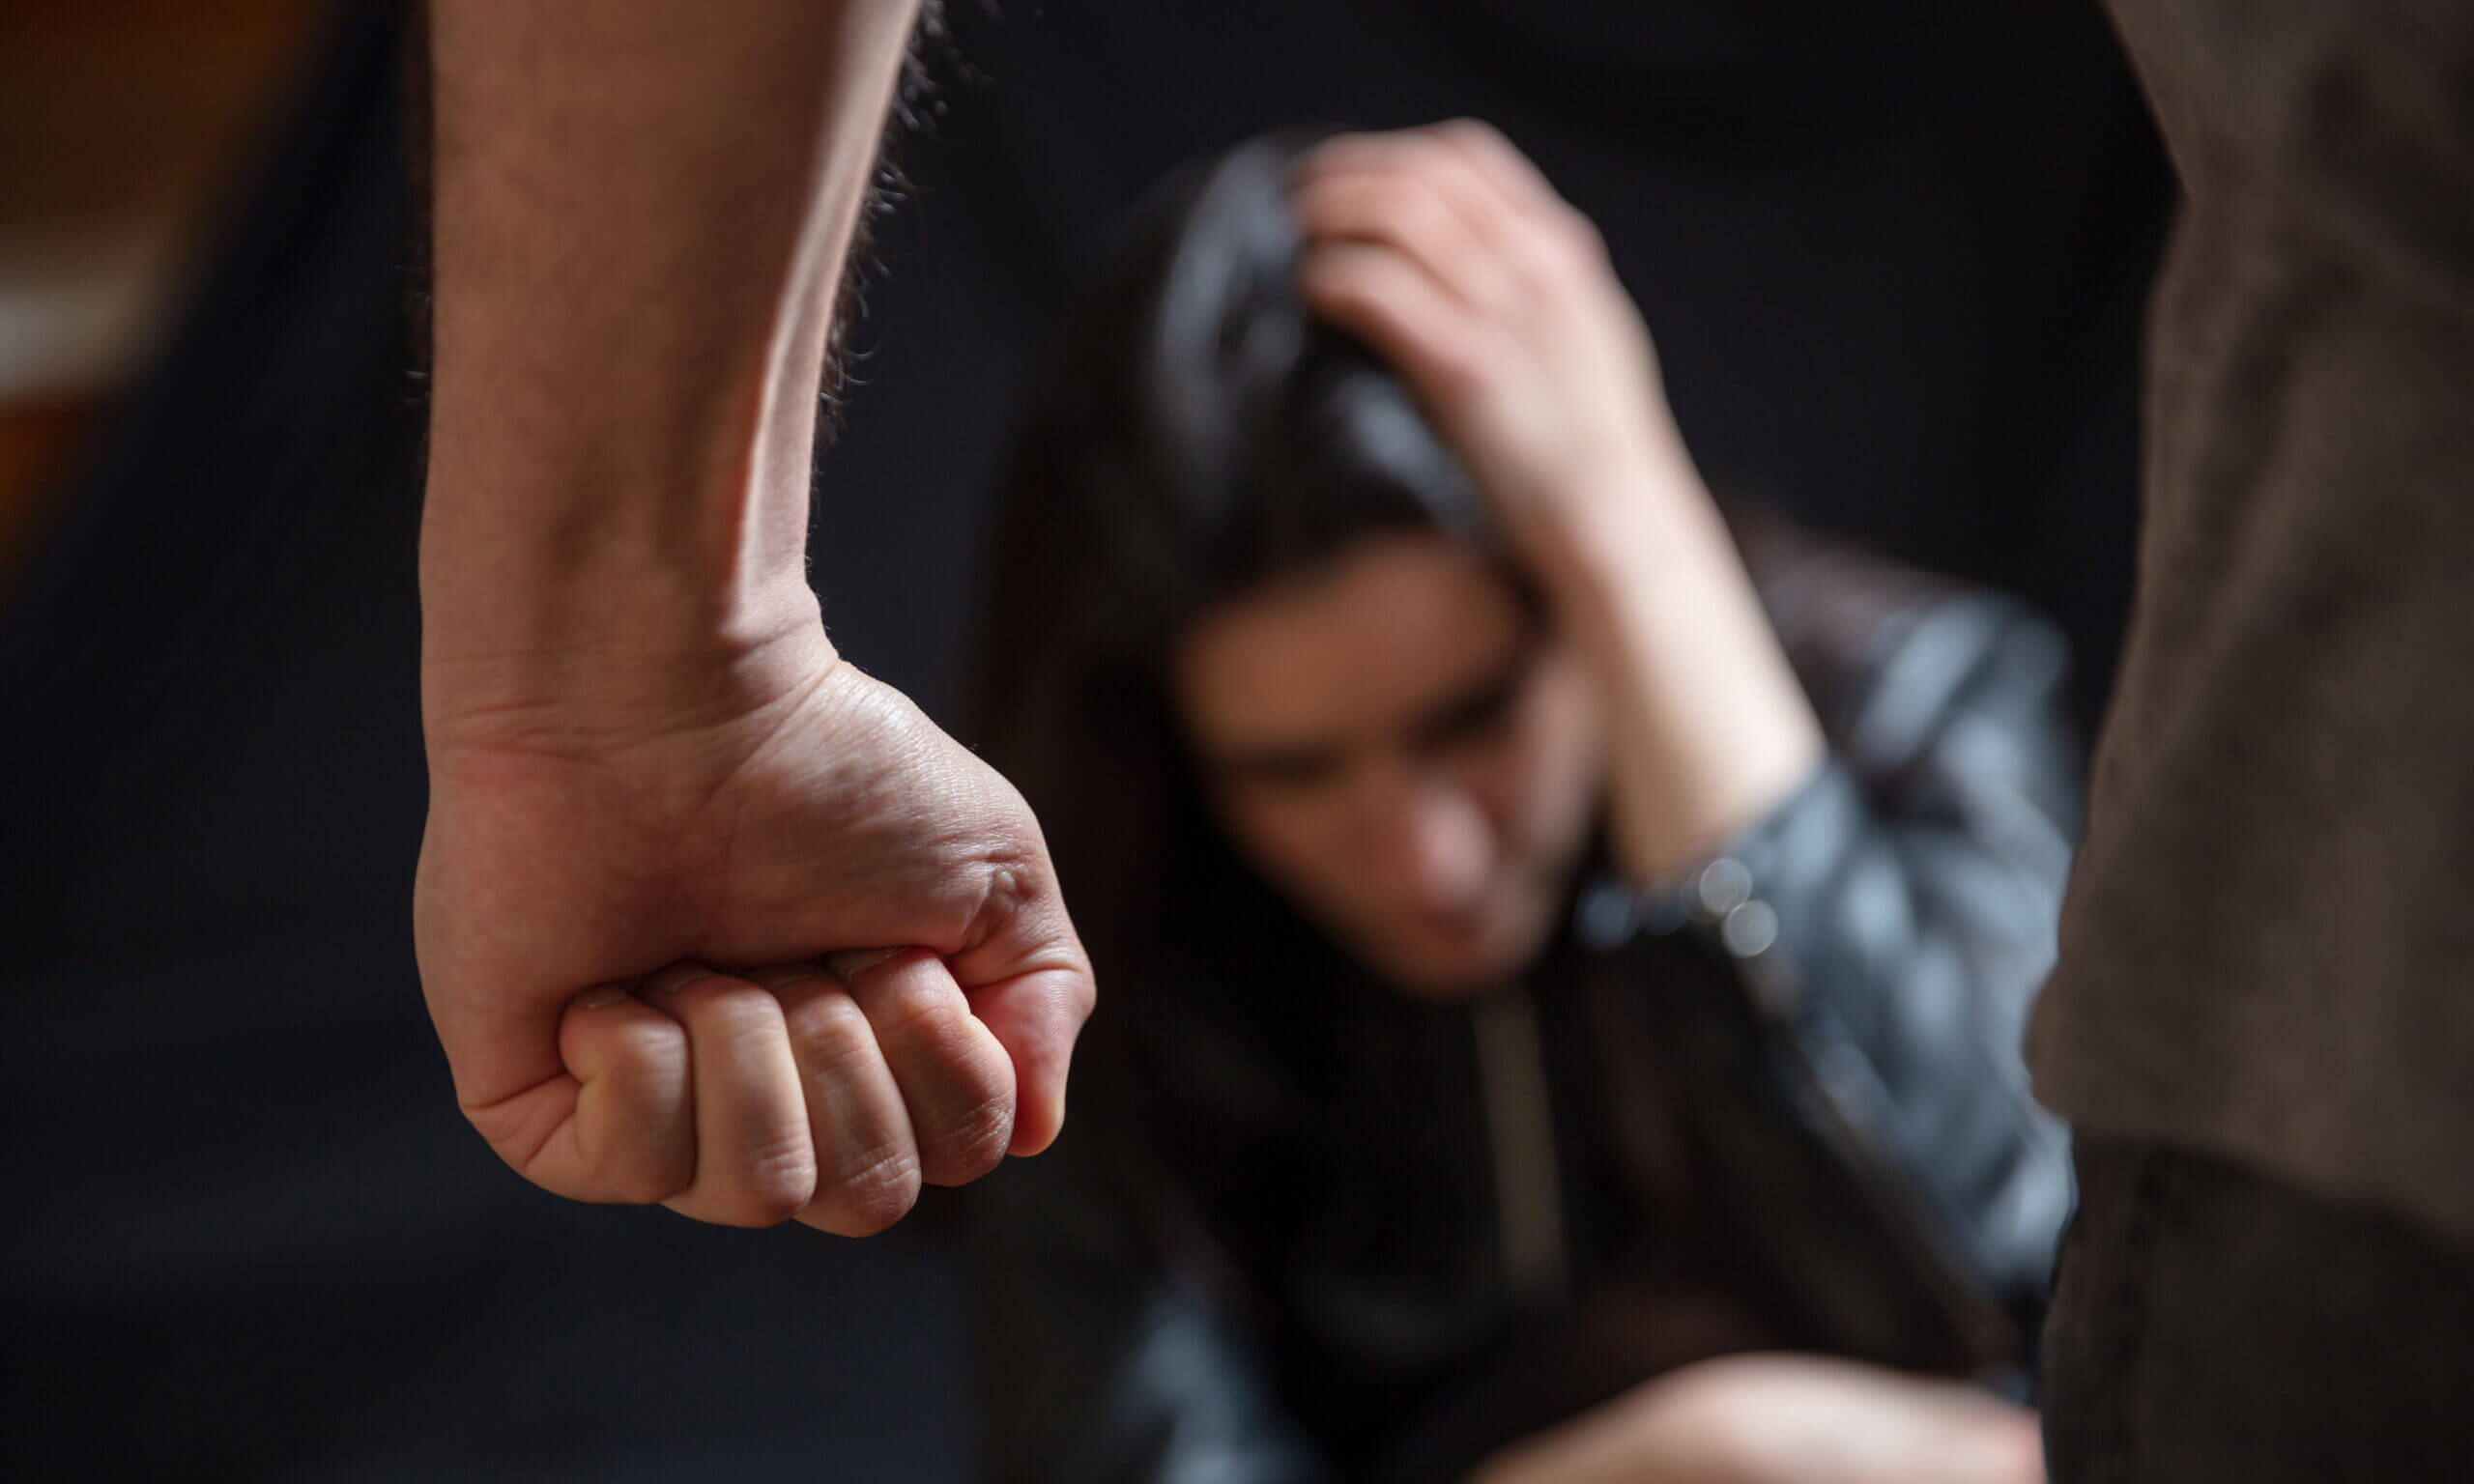 Woman abuse, Young woman scared holding head with hands, male clenched fist close up. Domestic violence, husband against wife. Dark room background